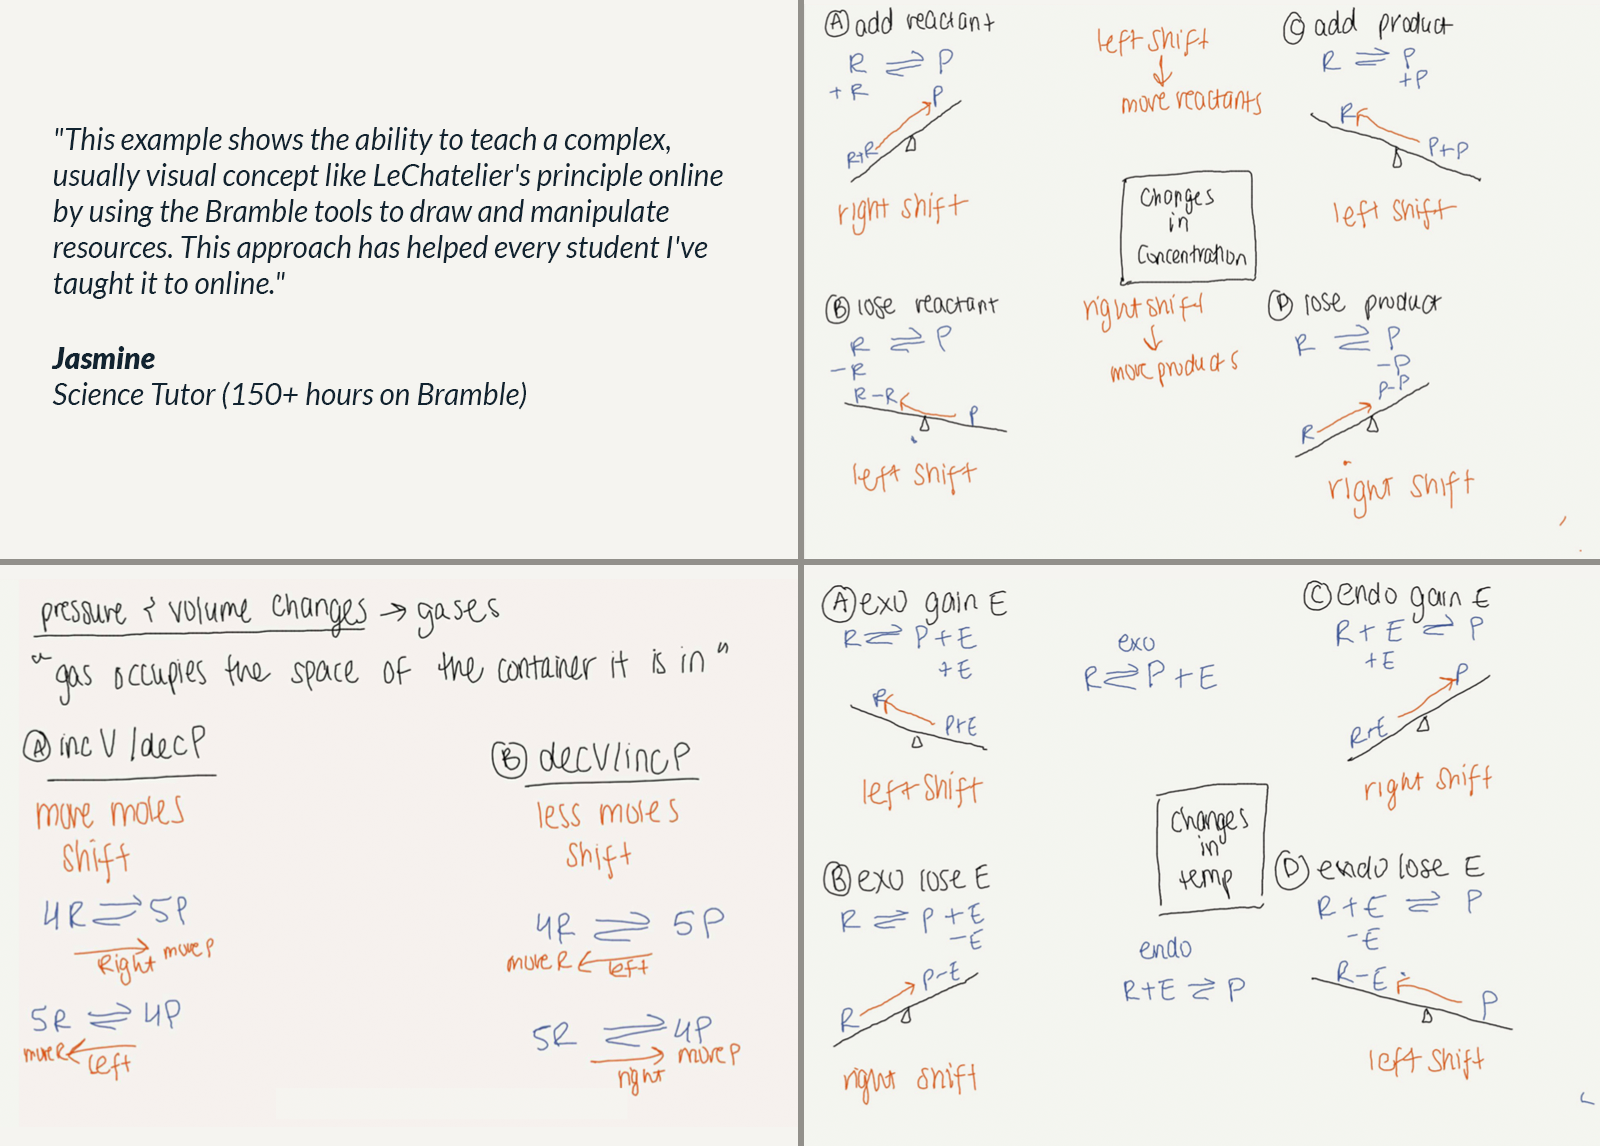 image showing different example pages of LeChatelier's principle by online tutor, Jasmine.